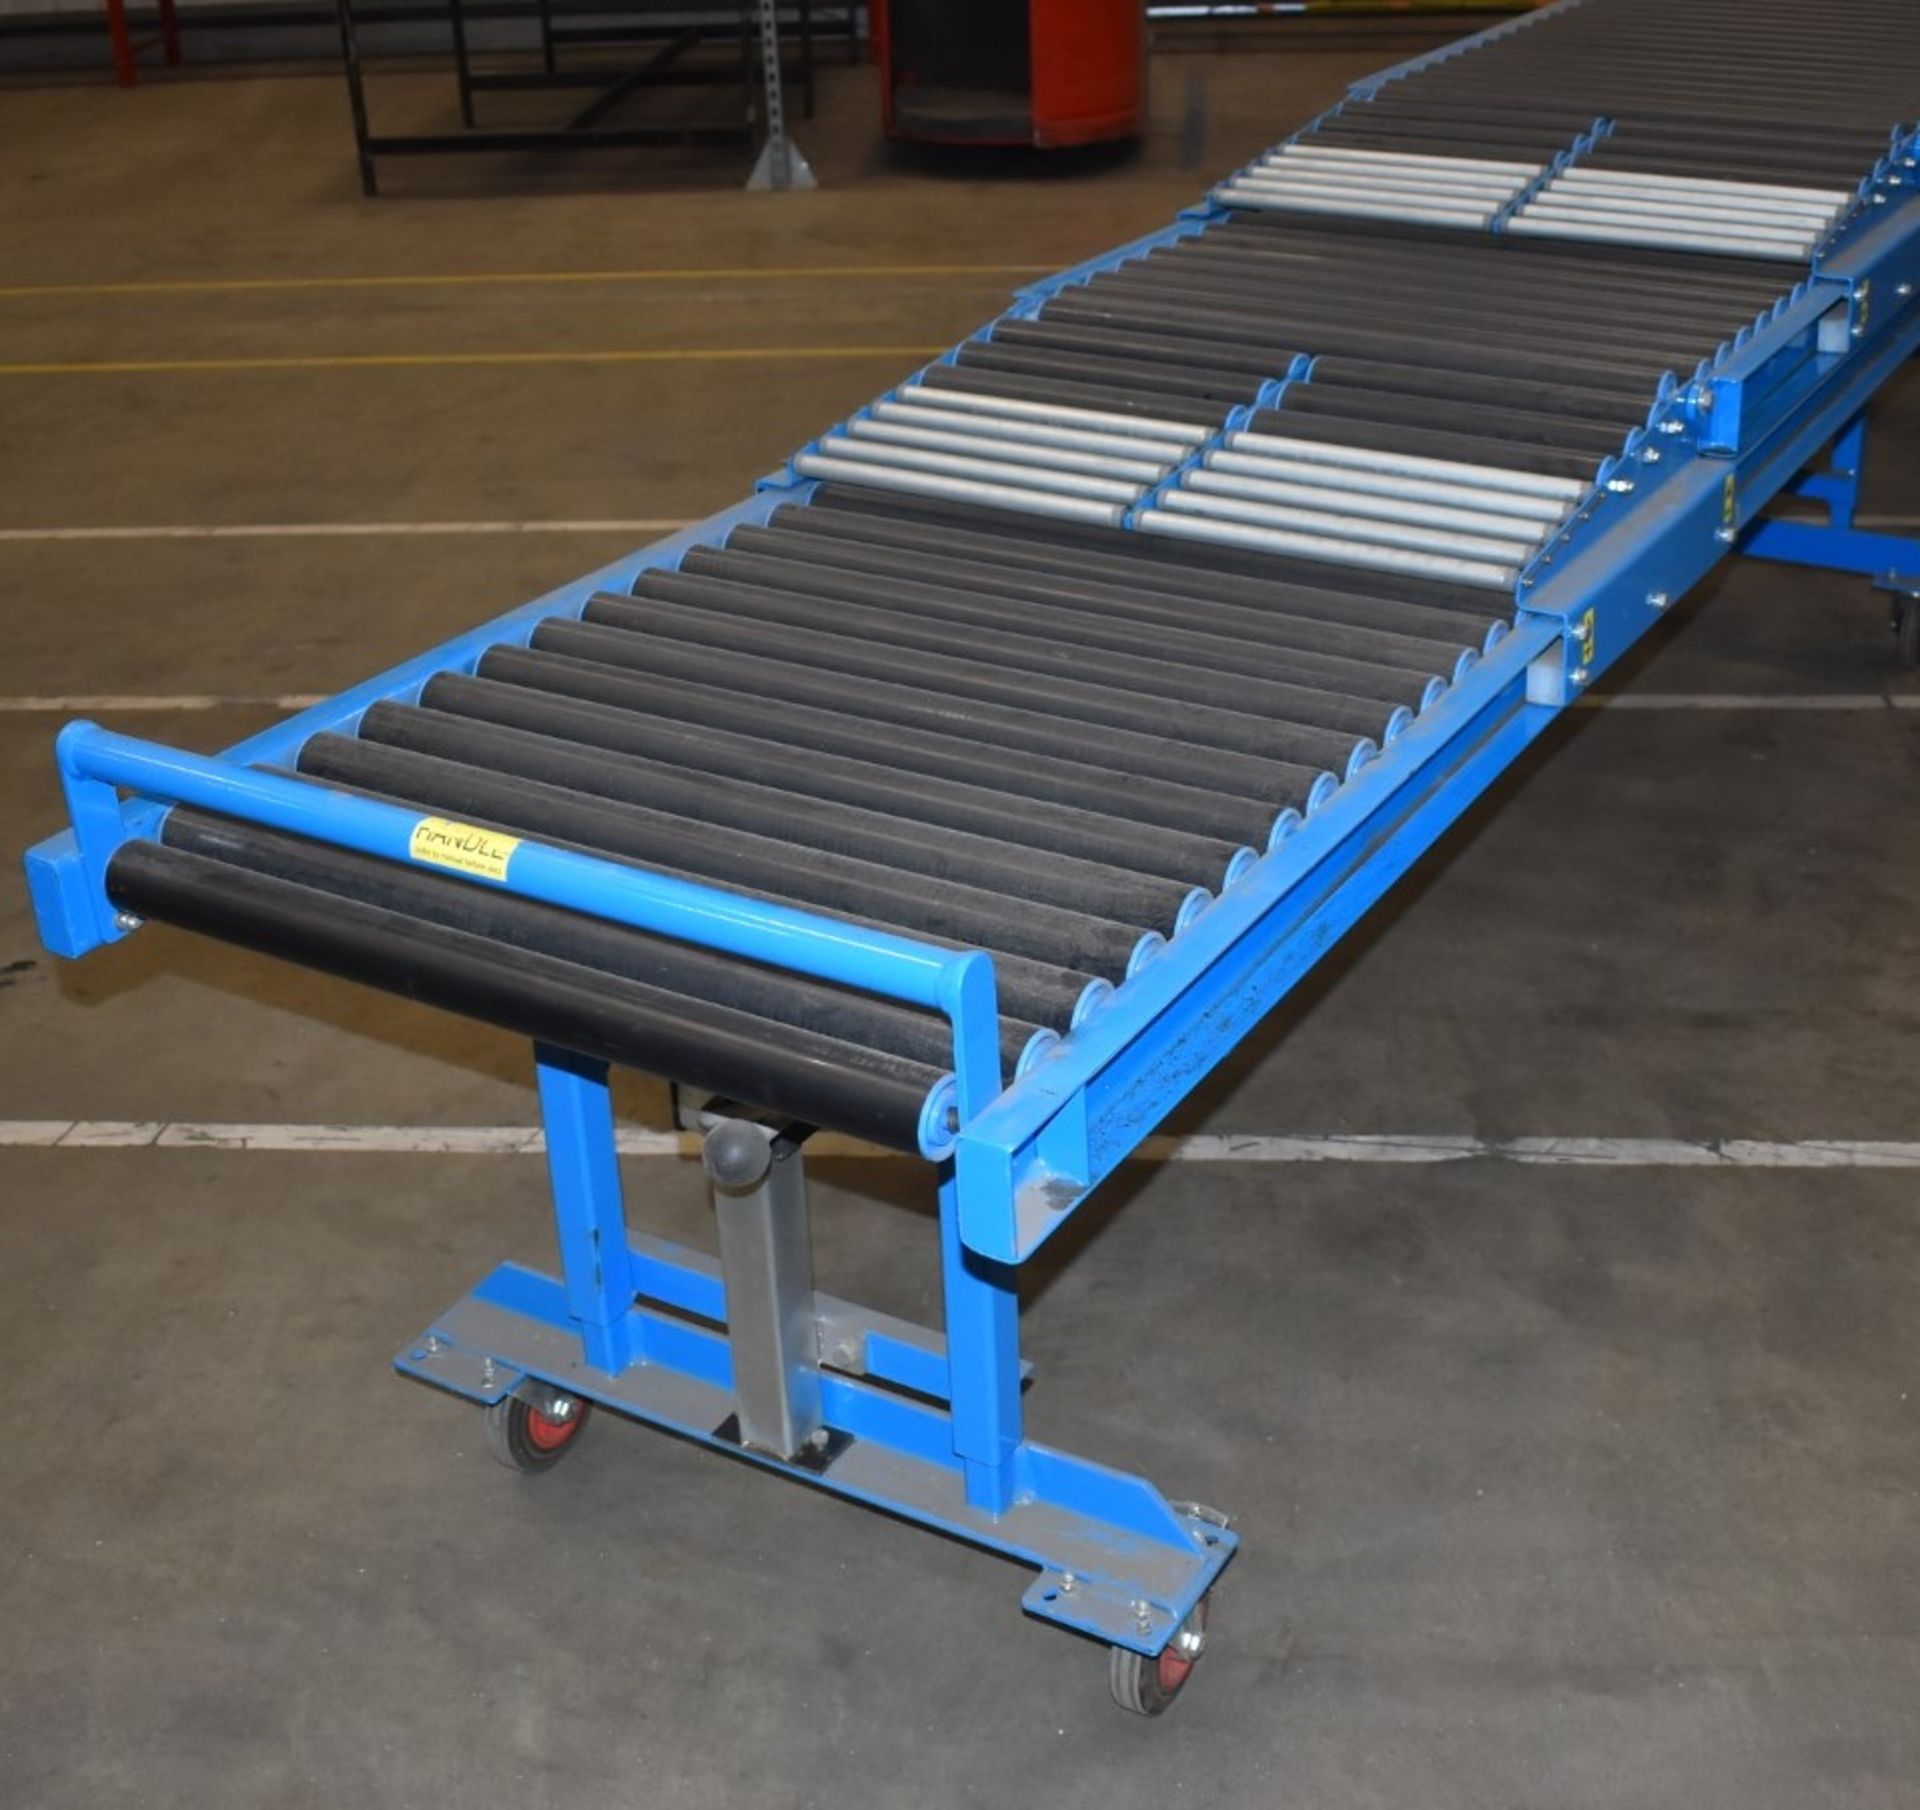 1 x Adjustable Manual Gravity Telescopic Conveyor - For Loading Trucks - Ref FE193A - CL480 - - Image 2 of 9